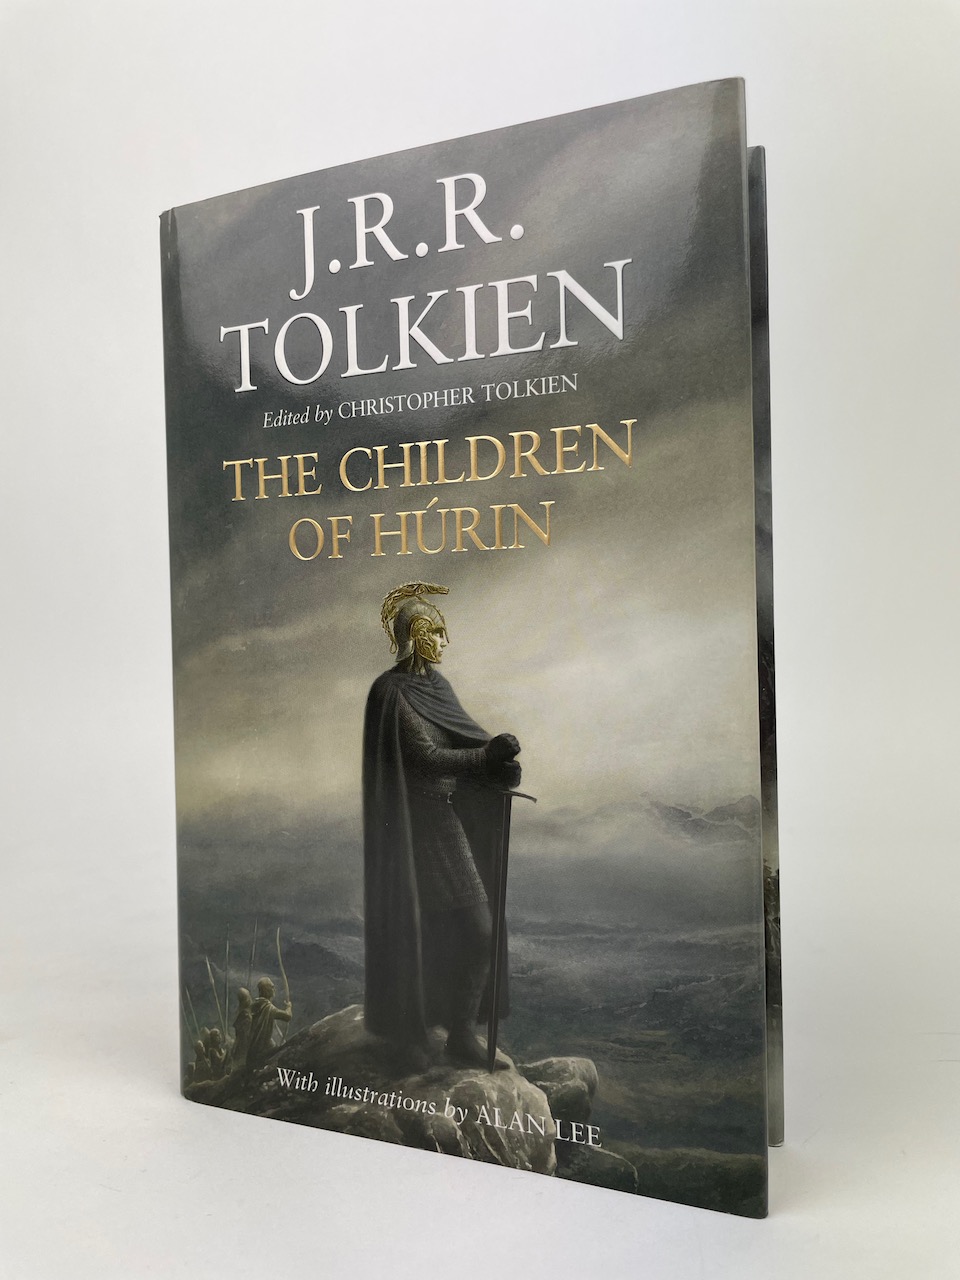 UK 1st Edition of The Children of Hurin, signed by Christopher Tolkien, Allan Lee and Bernard Hill